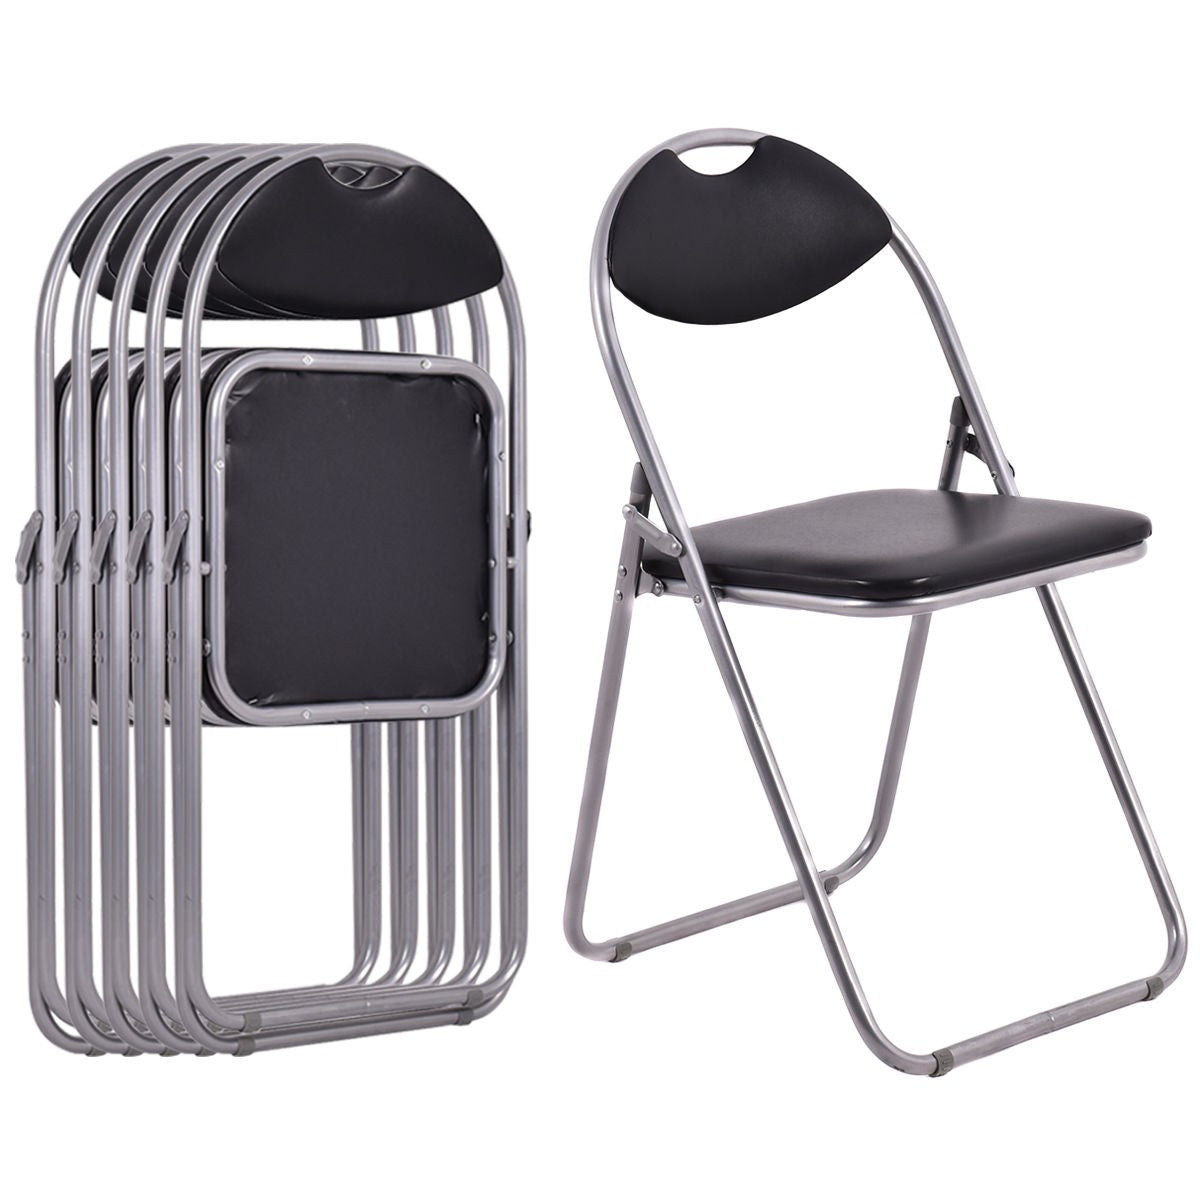 6 PCS Folding Chairs Set with Padded Seats and Carrying Handle - Giantexus